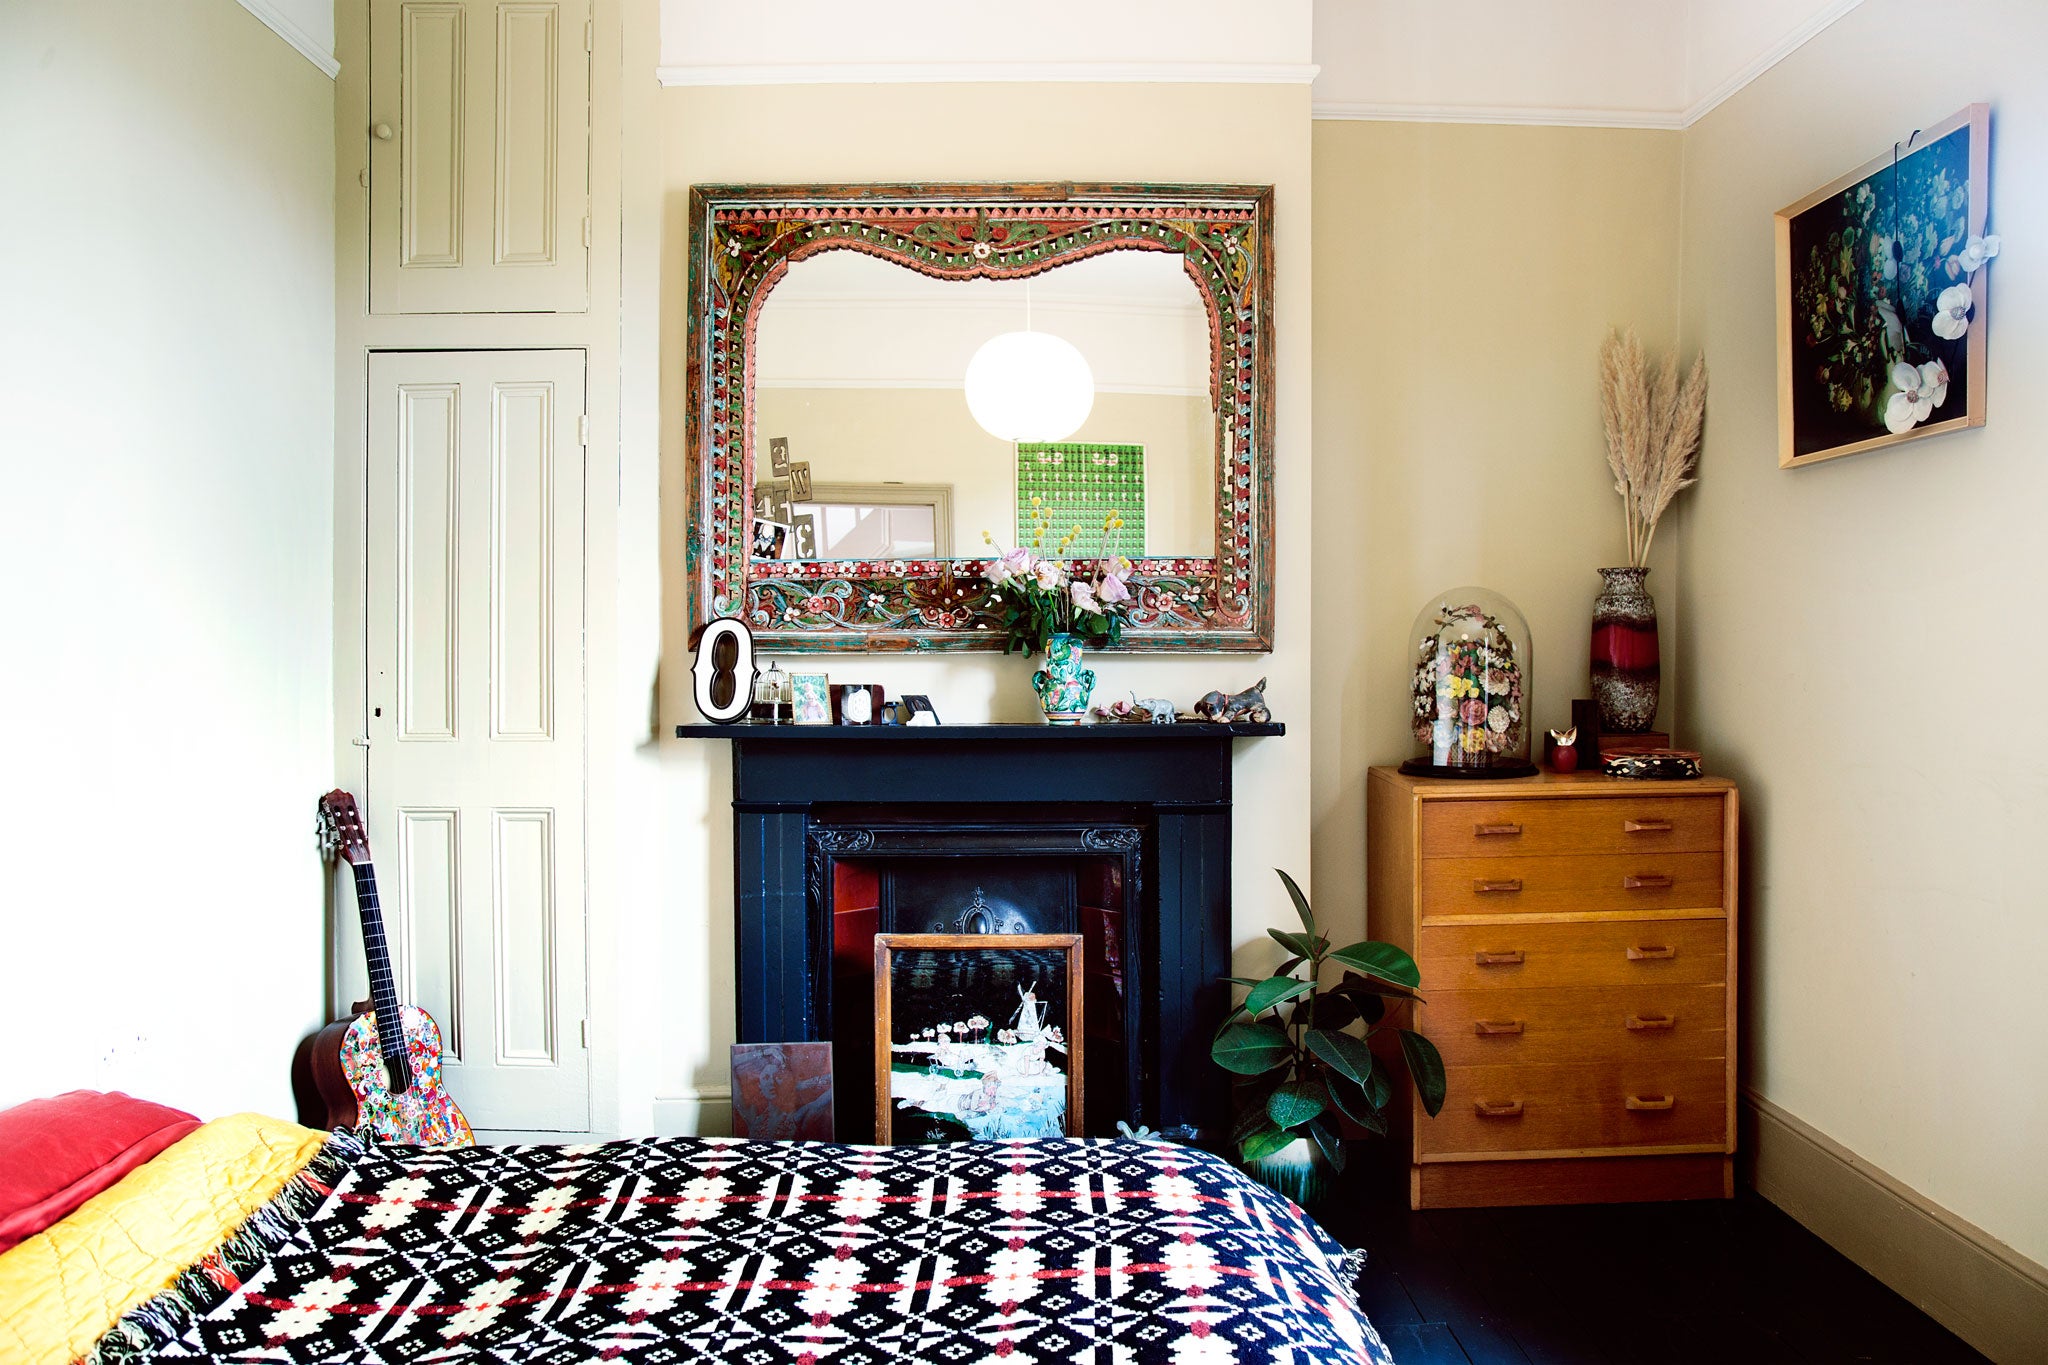 The spare room, complete with salvaged mirror